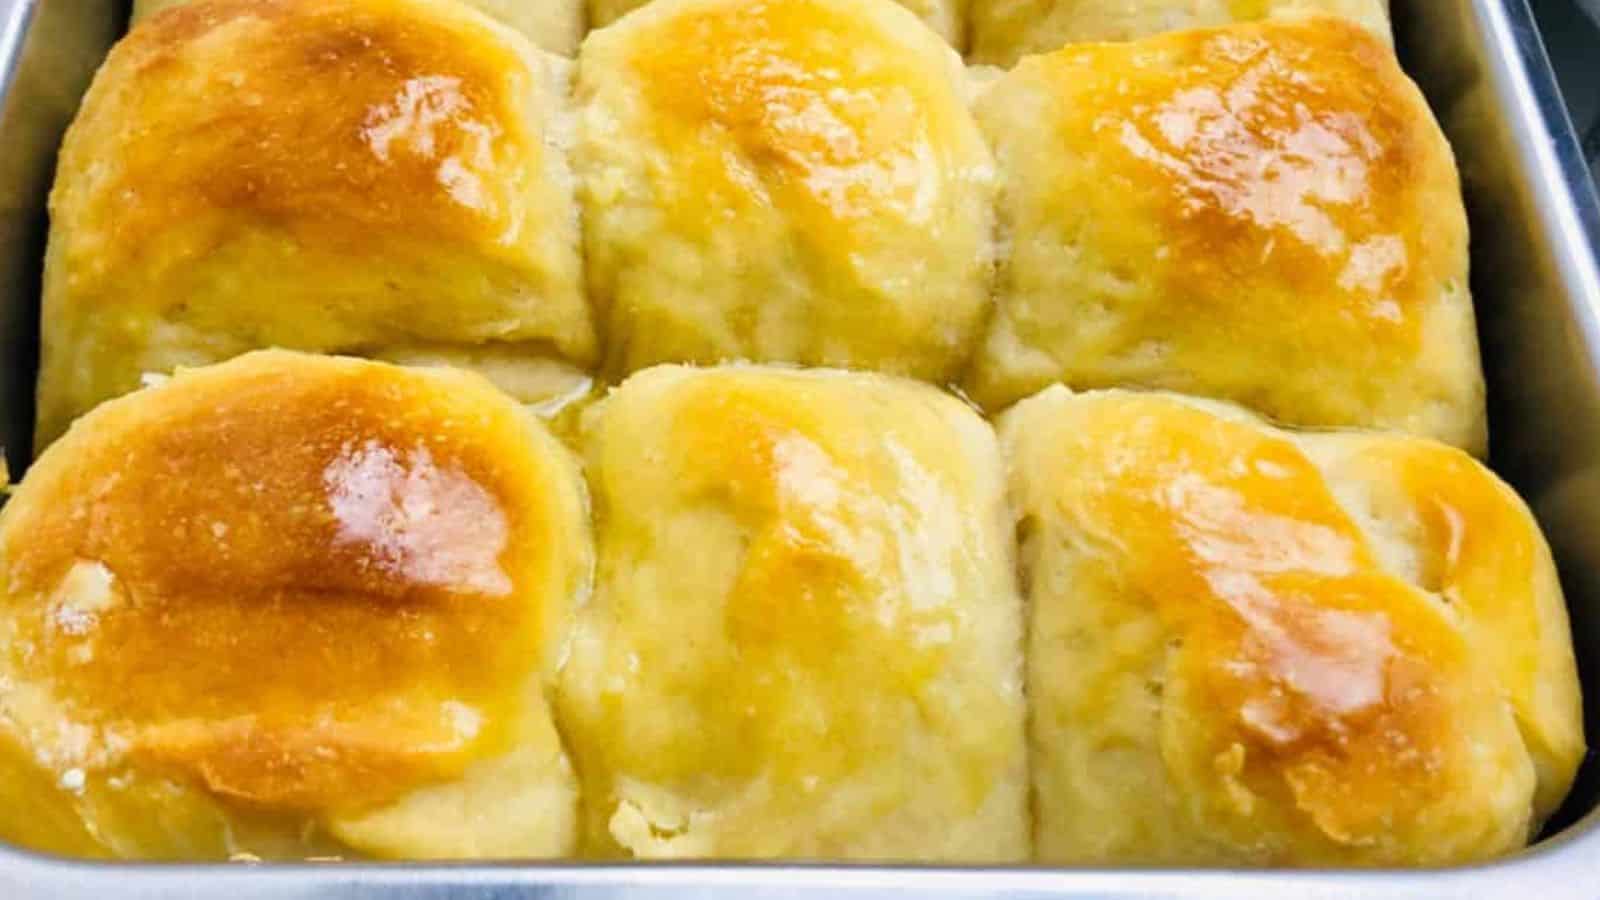 A baking tray filled with nine freshly baked, golden brown, and shiny dinner rolls closely arranged together.